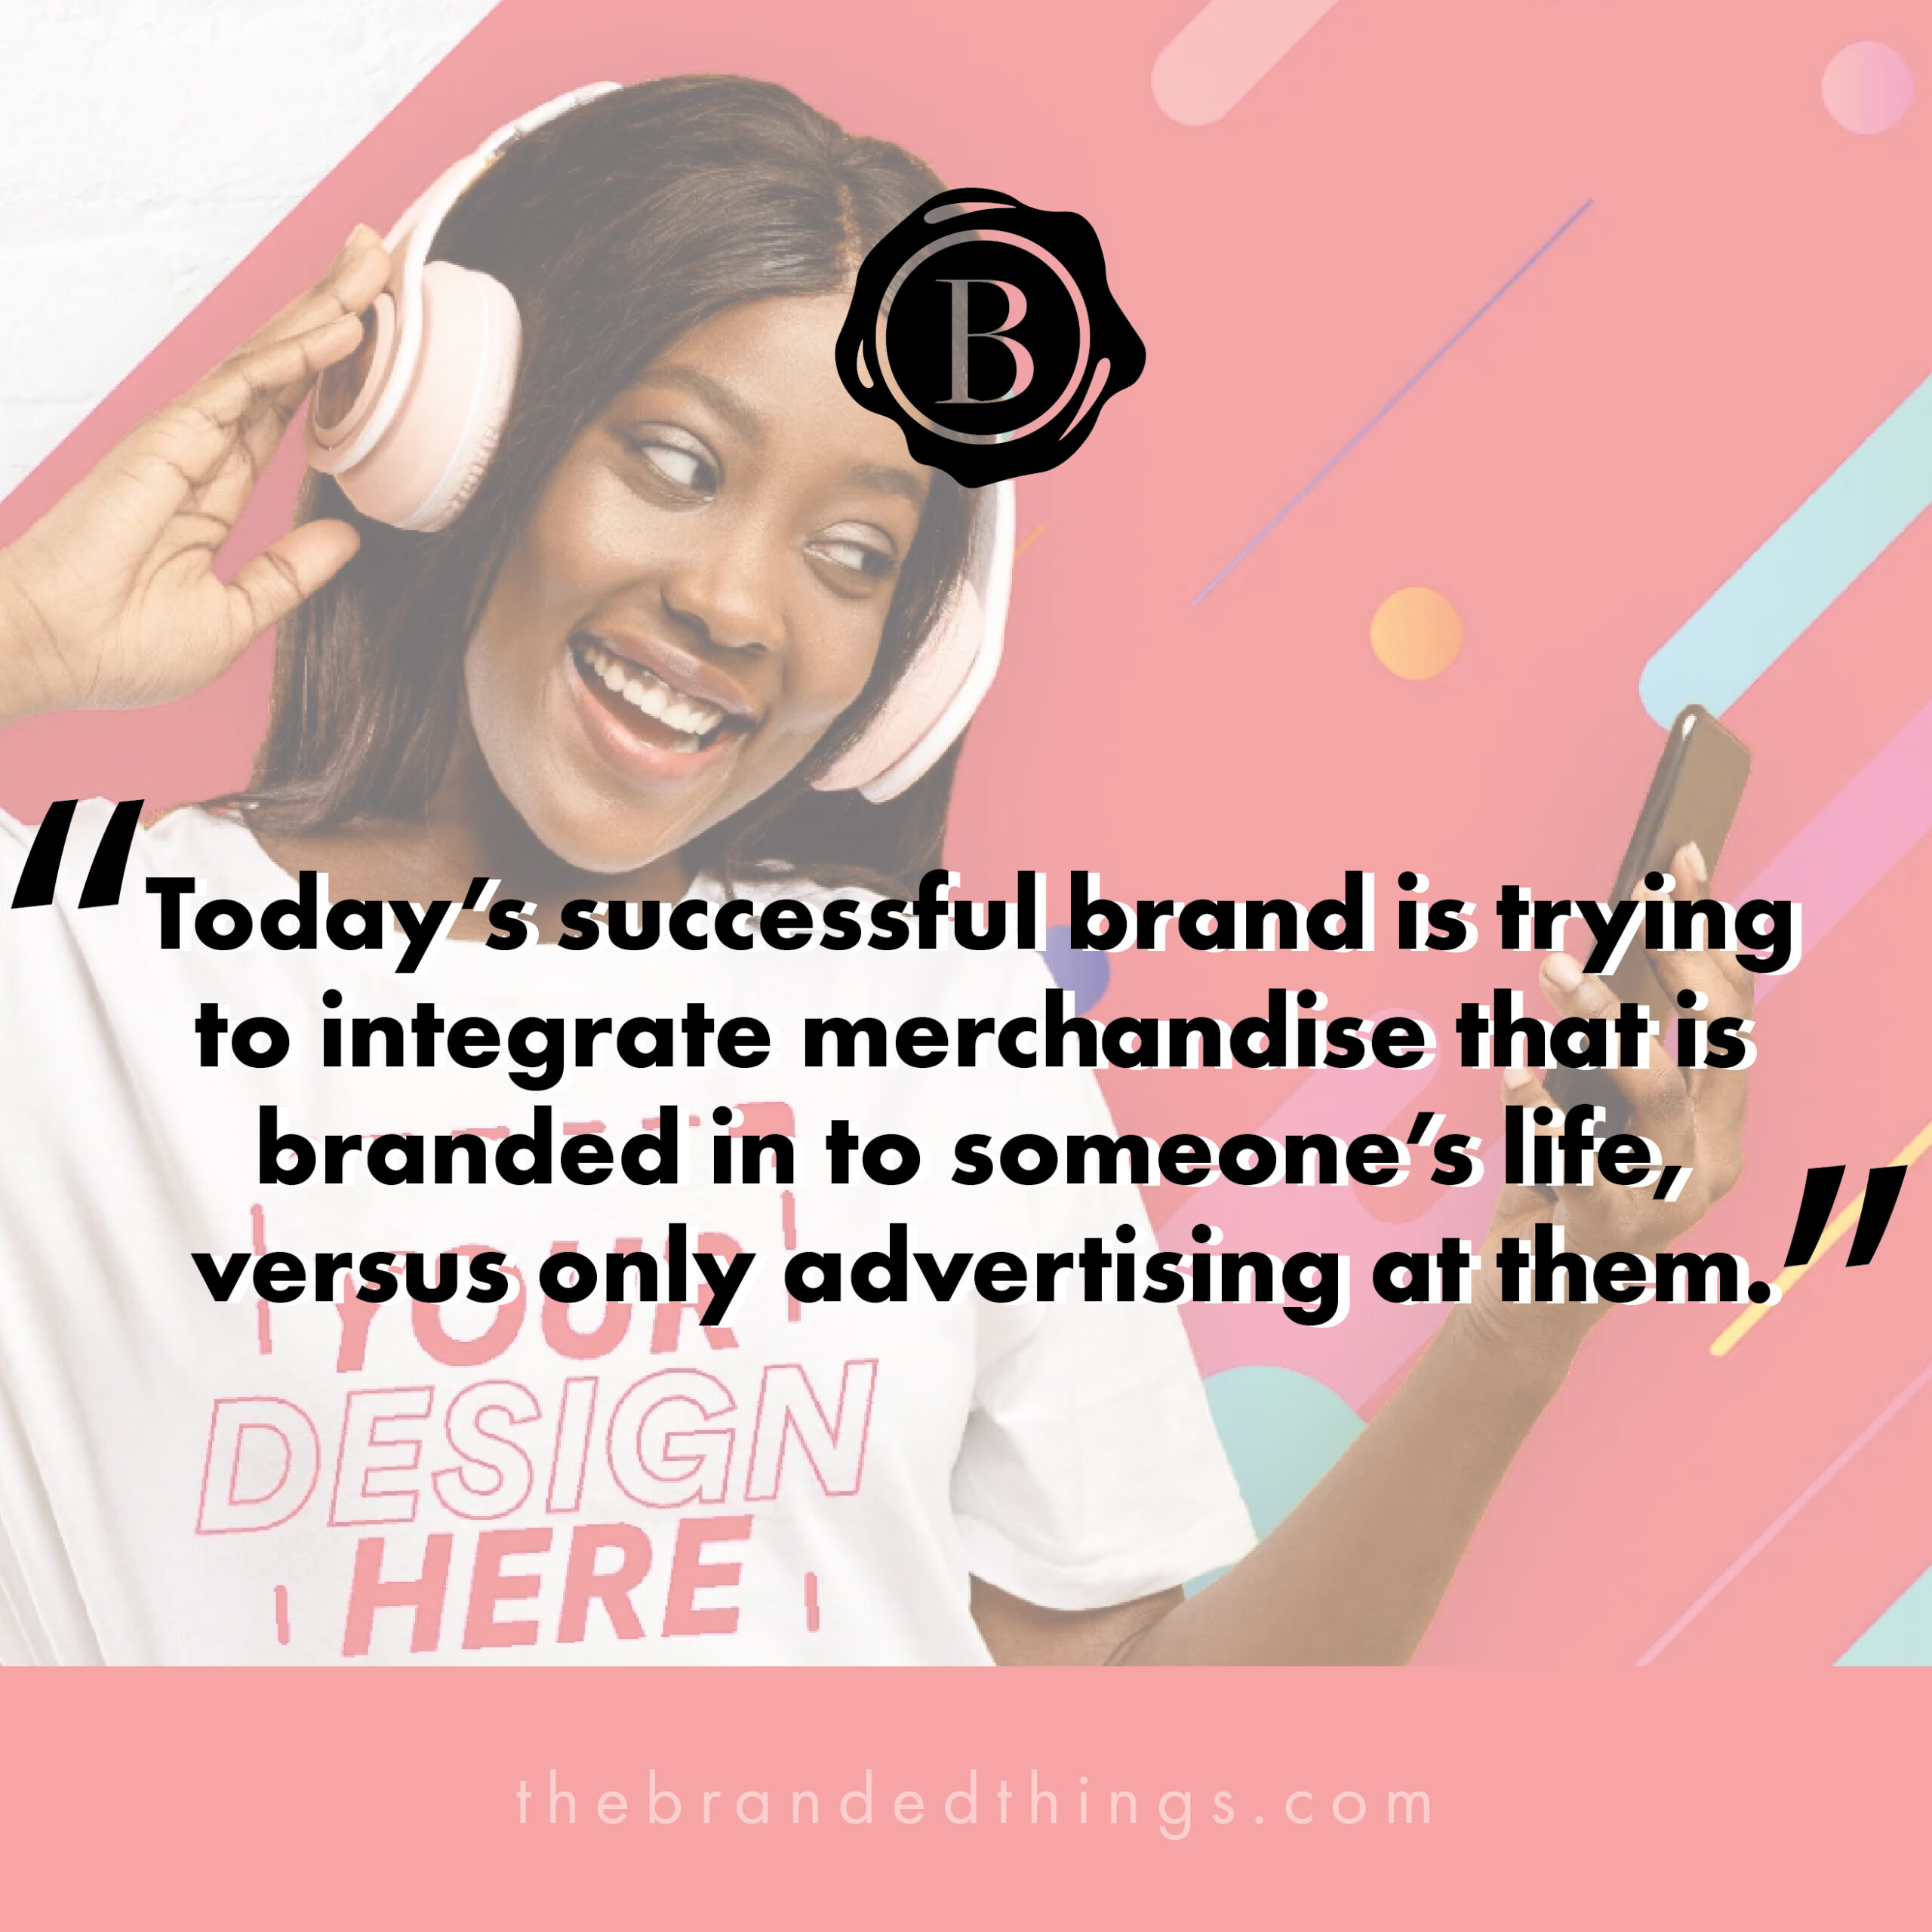 Quote about successful branded merch usage